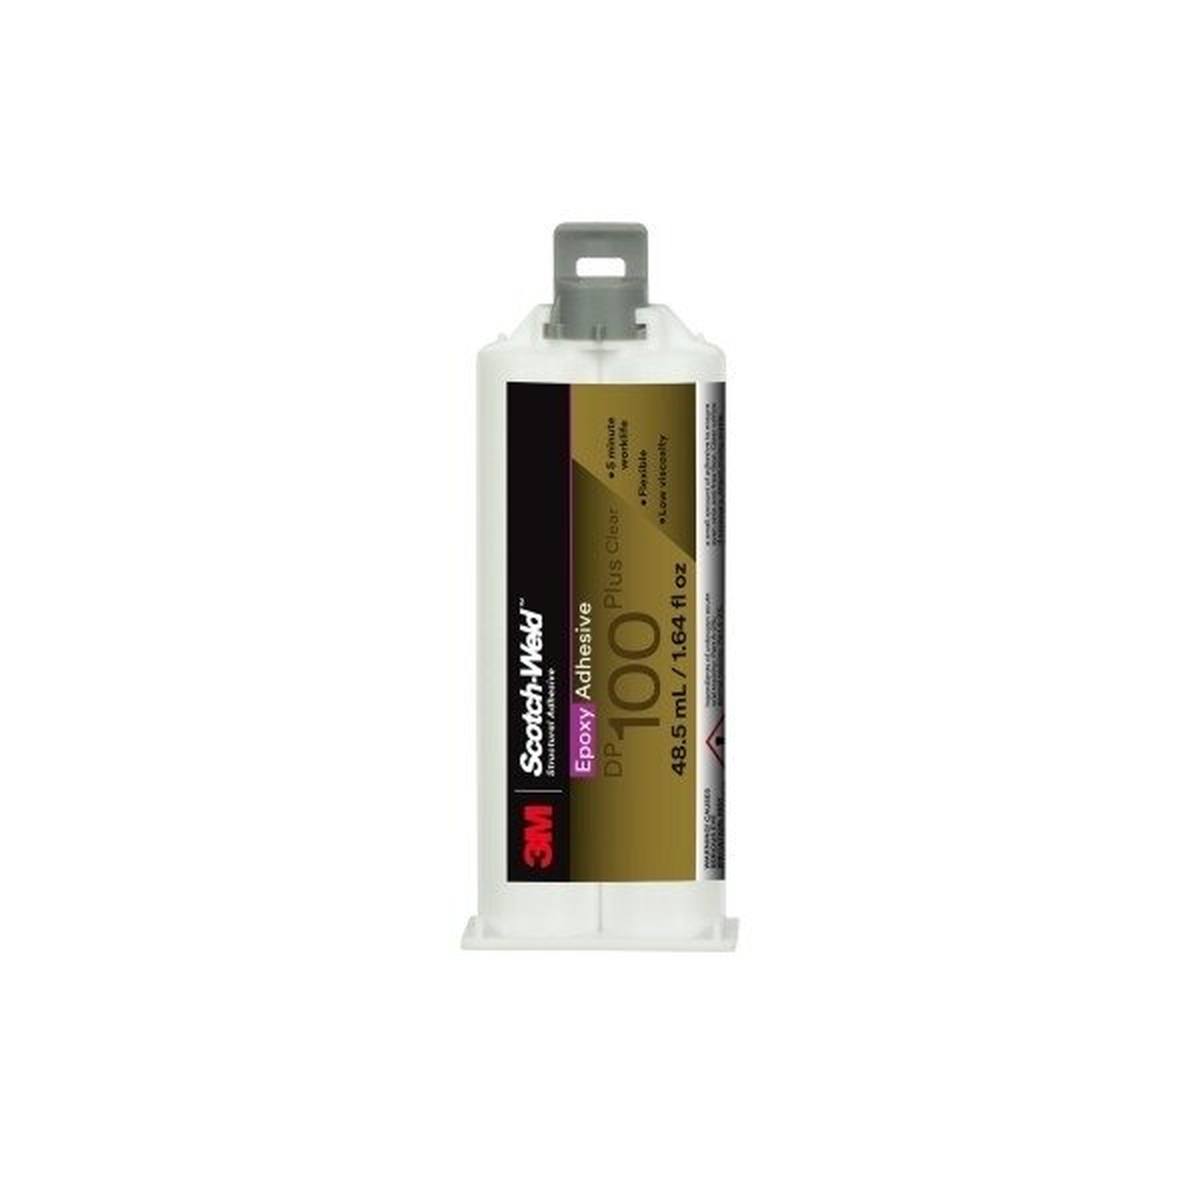 3M Scotch-Weld 2-component construction adhesive based on epoxy resin for the EPX system DP 100 NS, beige, 48.5 ml